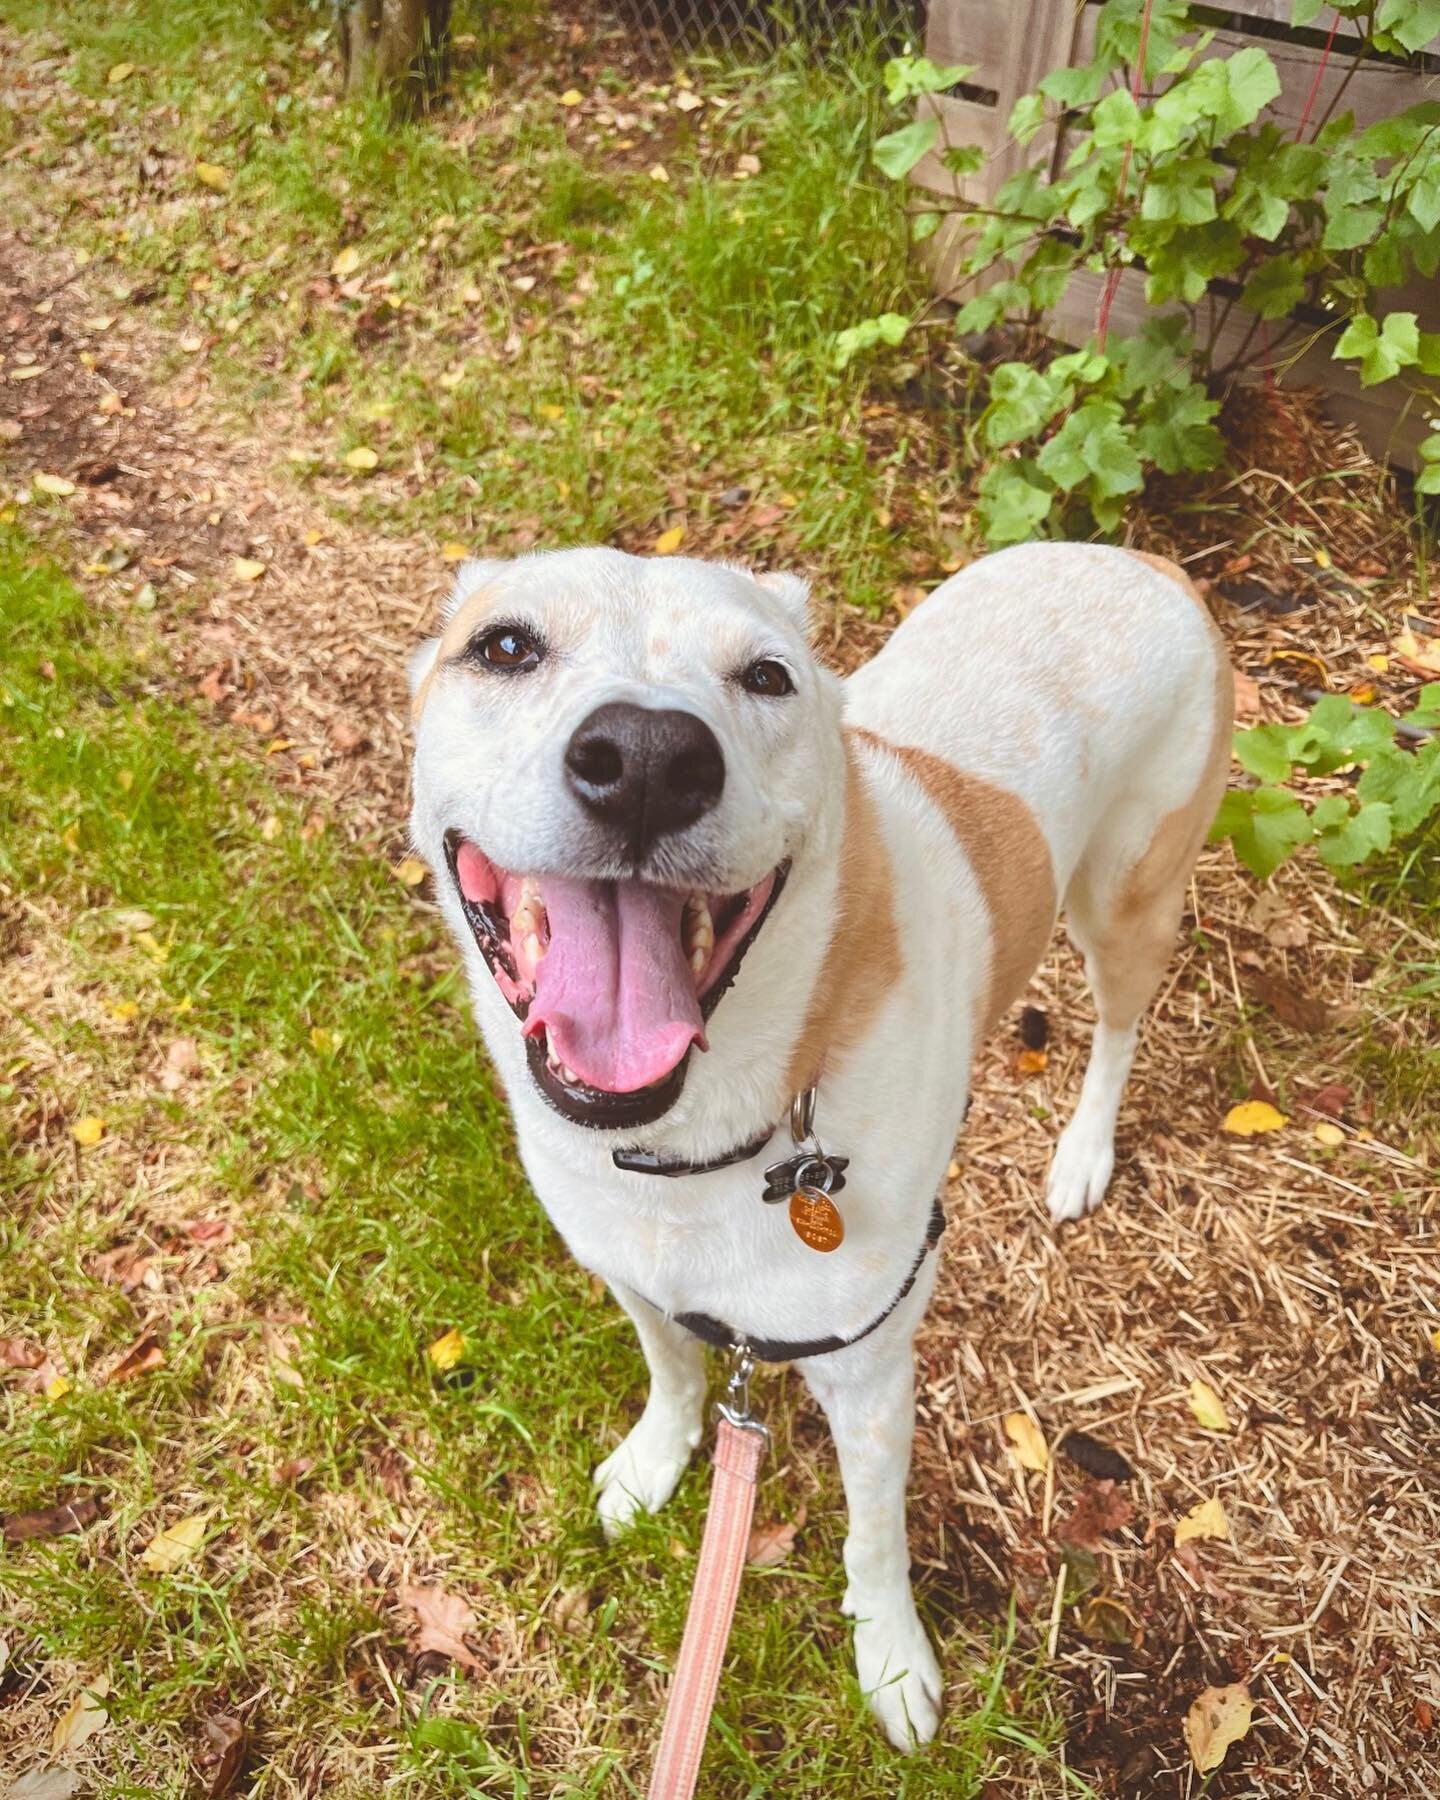 Loot at this giant smile! Pots is the happiest gal around! 💖☀️🐾
.
.
.
#portlandoregon #portland #pdx #portlandpets #portlandpetsitter #portlanddogsitter #portlanddogwalkers #portlanddogs #portlanddog #portlanddogwalker #portlanddogadventures #portl